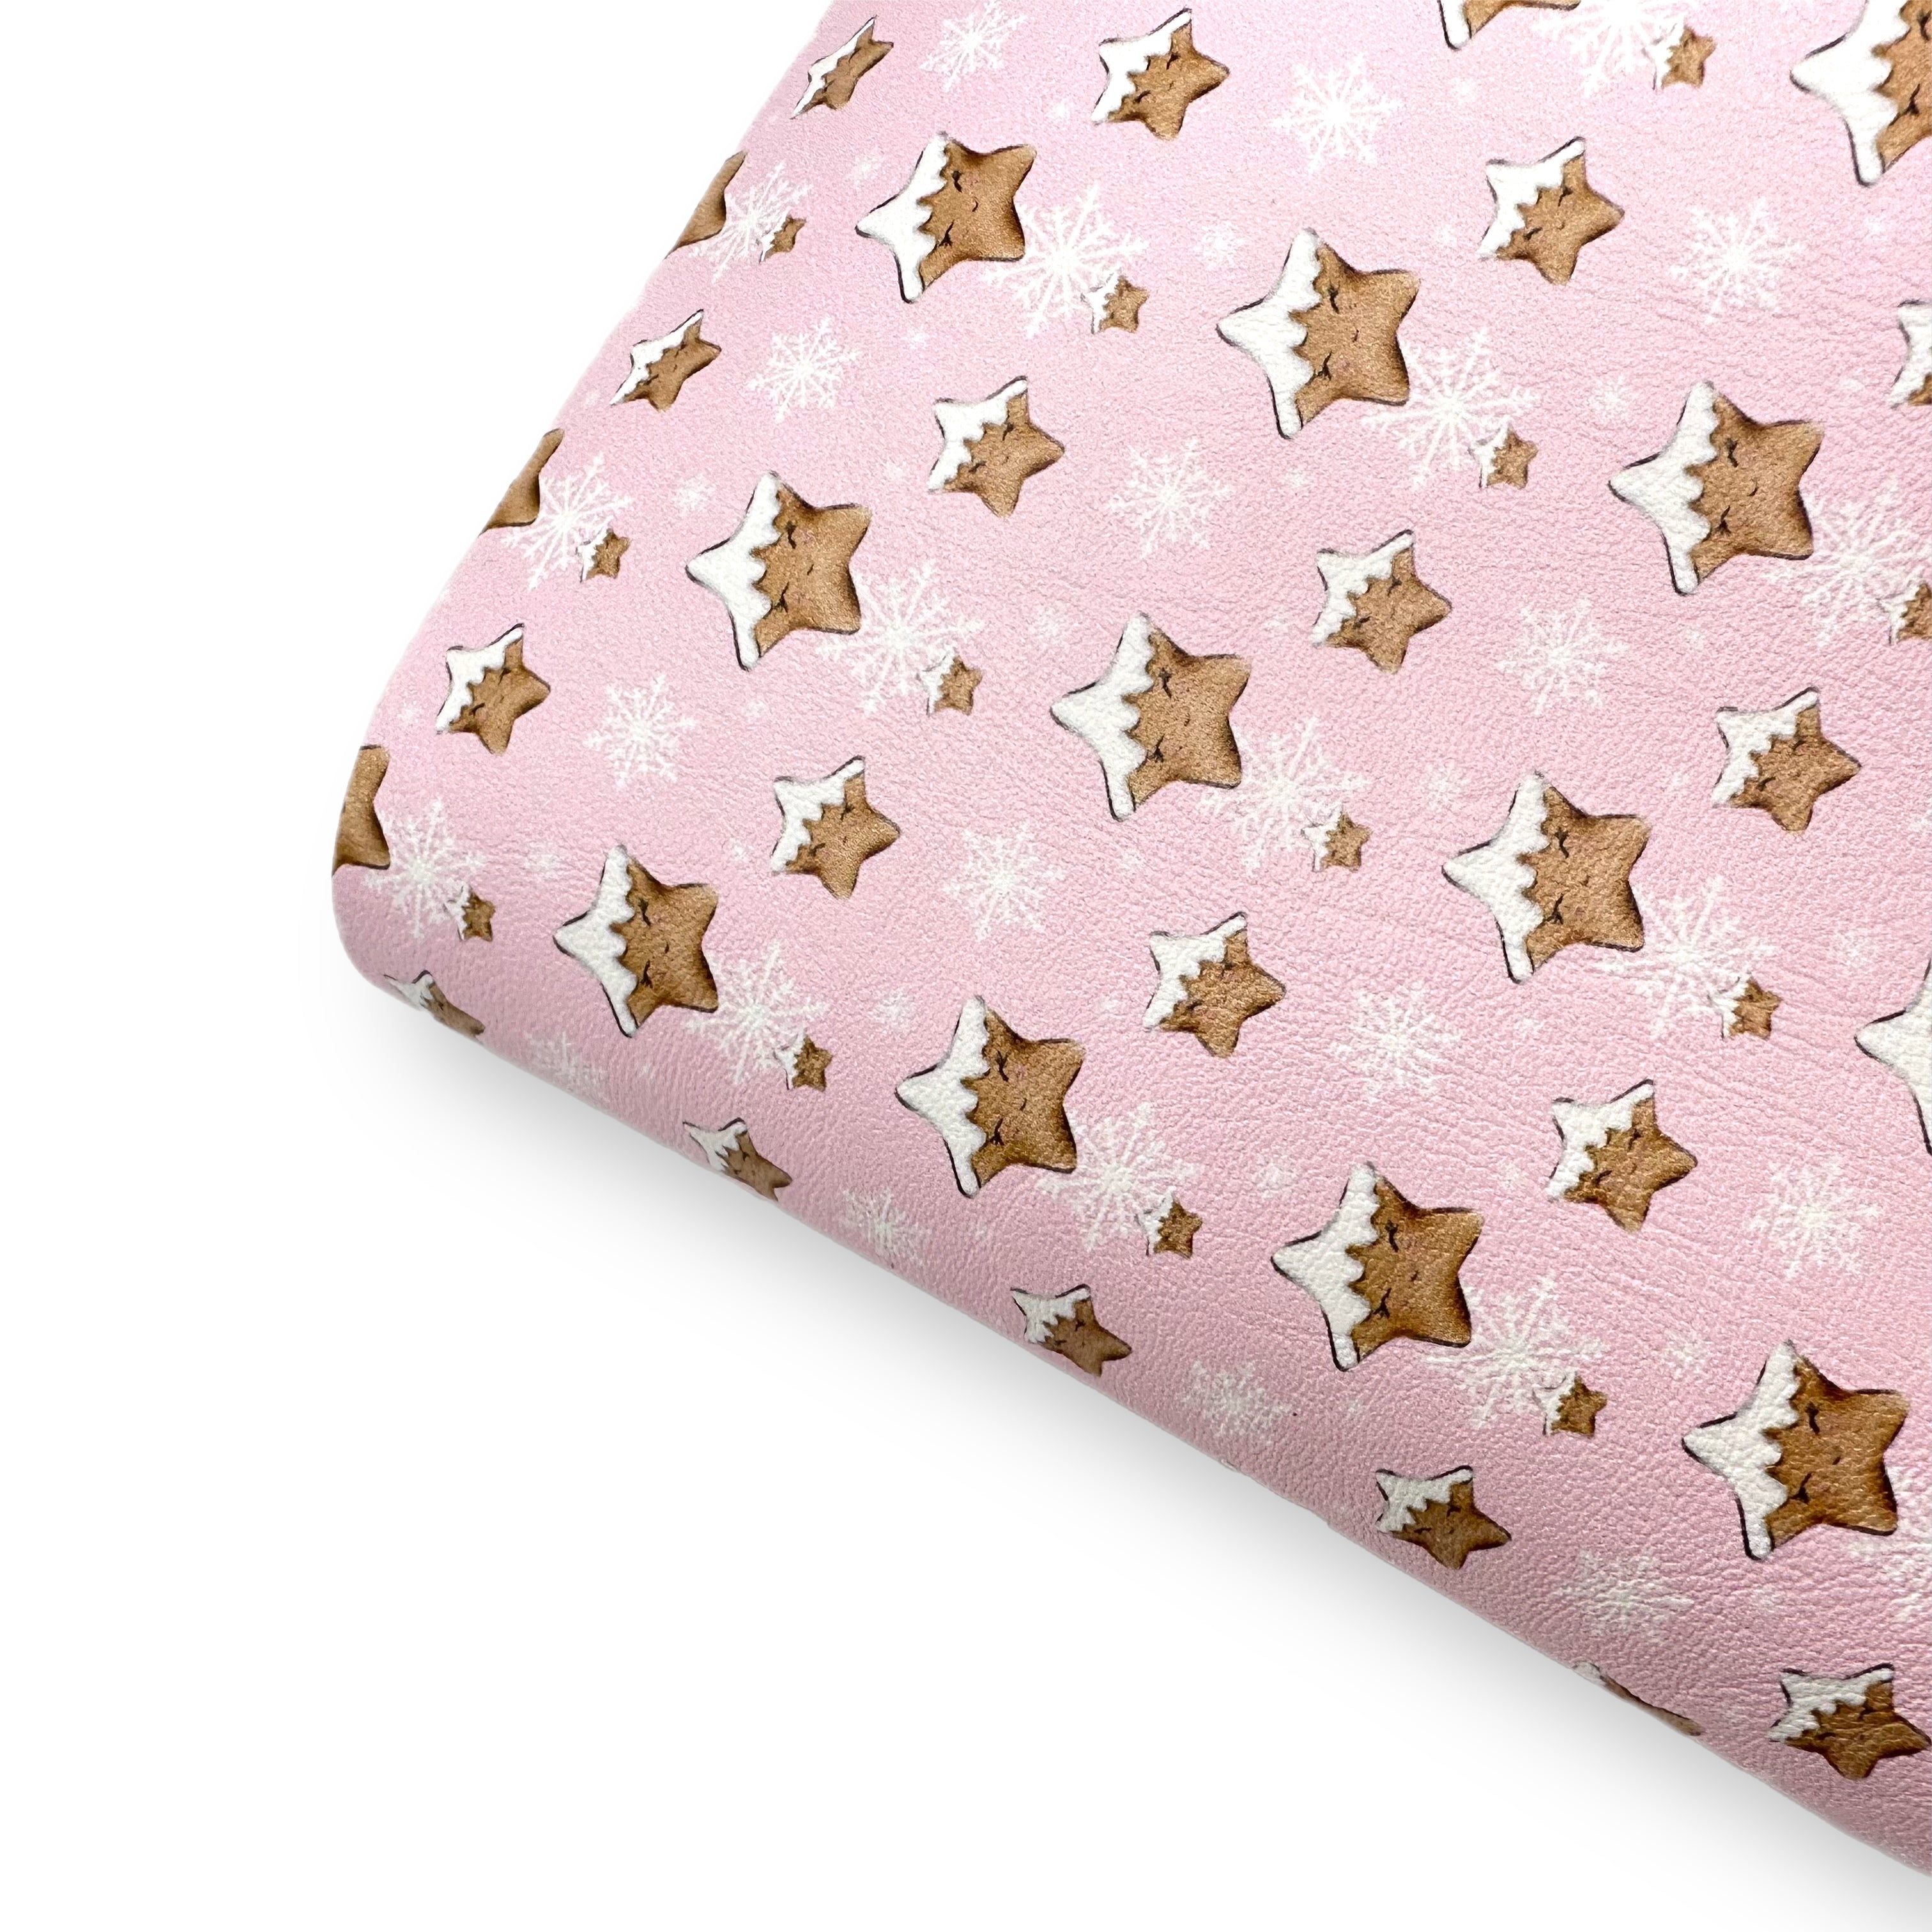 Frosted Star Gingerbread Cookies Premium Faux Leather Fabric Sheets